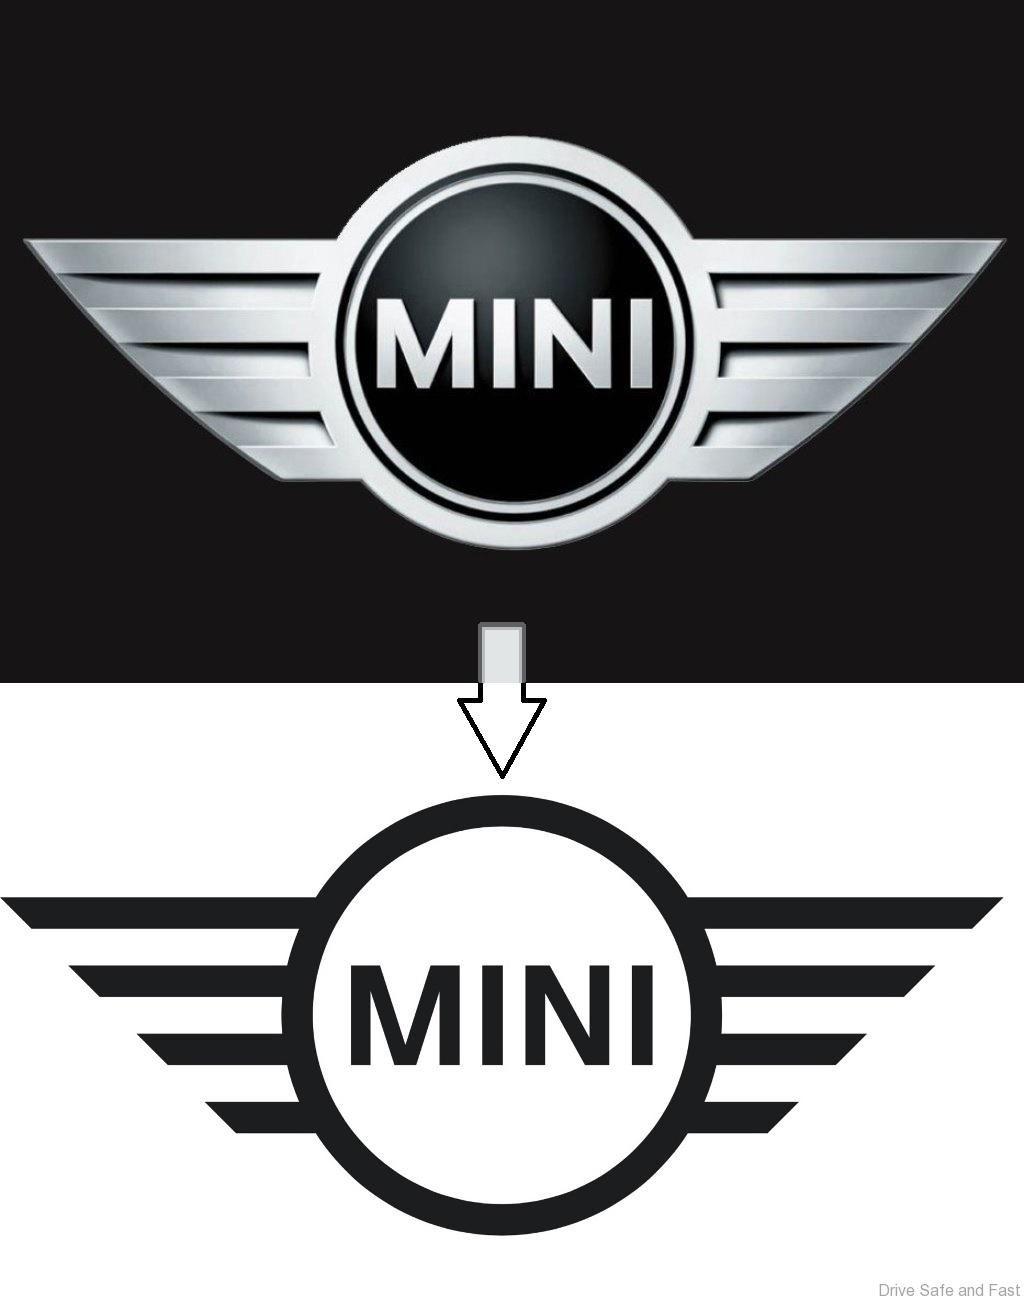 New Mini Logo - MINI Has a new Logo and Brand Strategy – Drive Safe and Fast